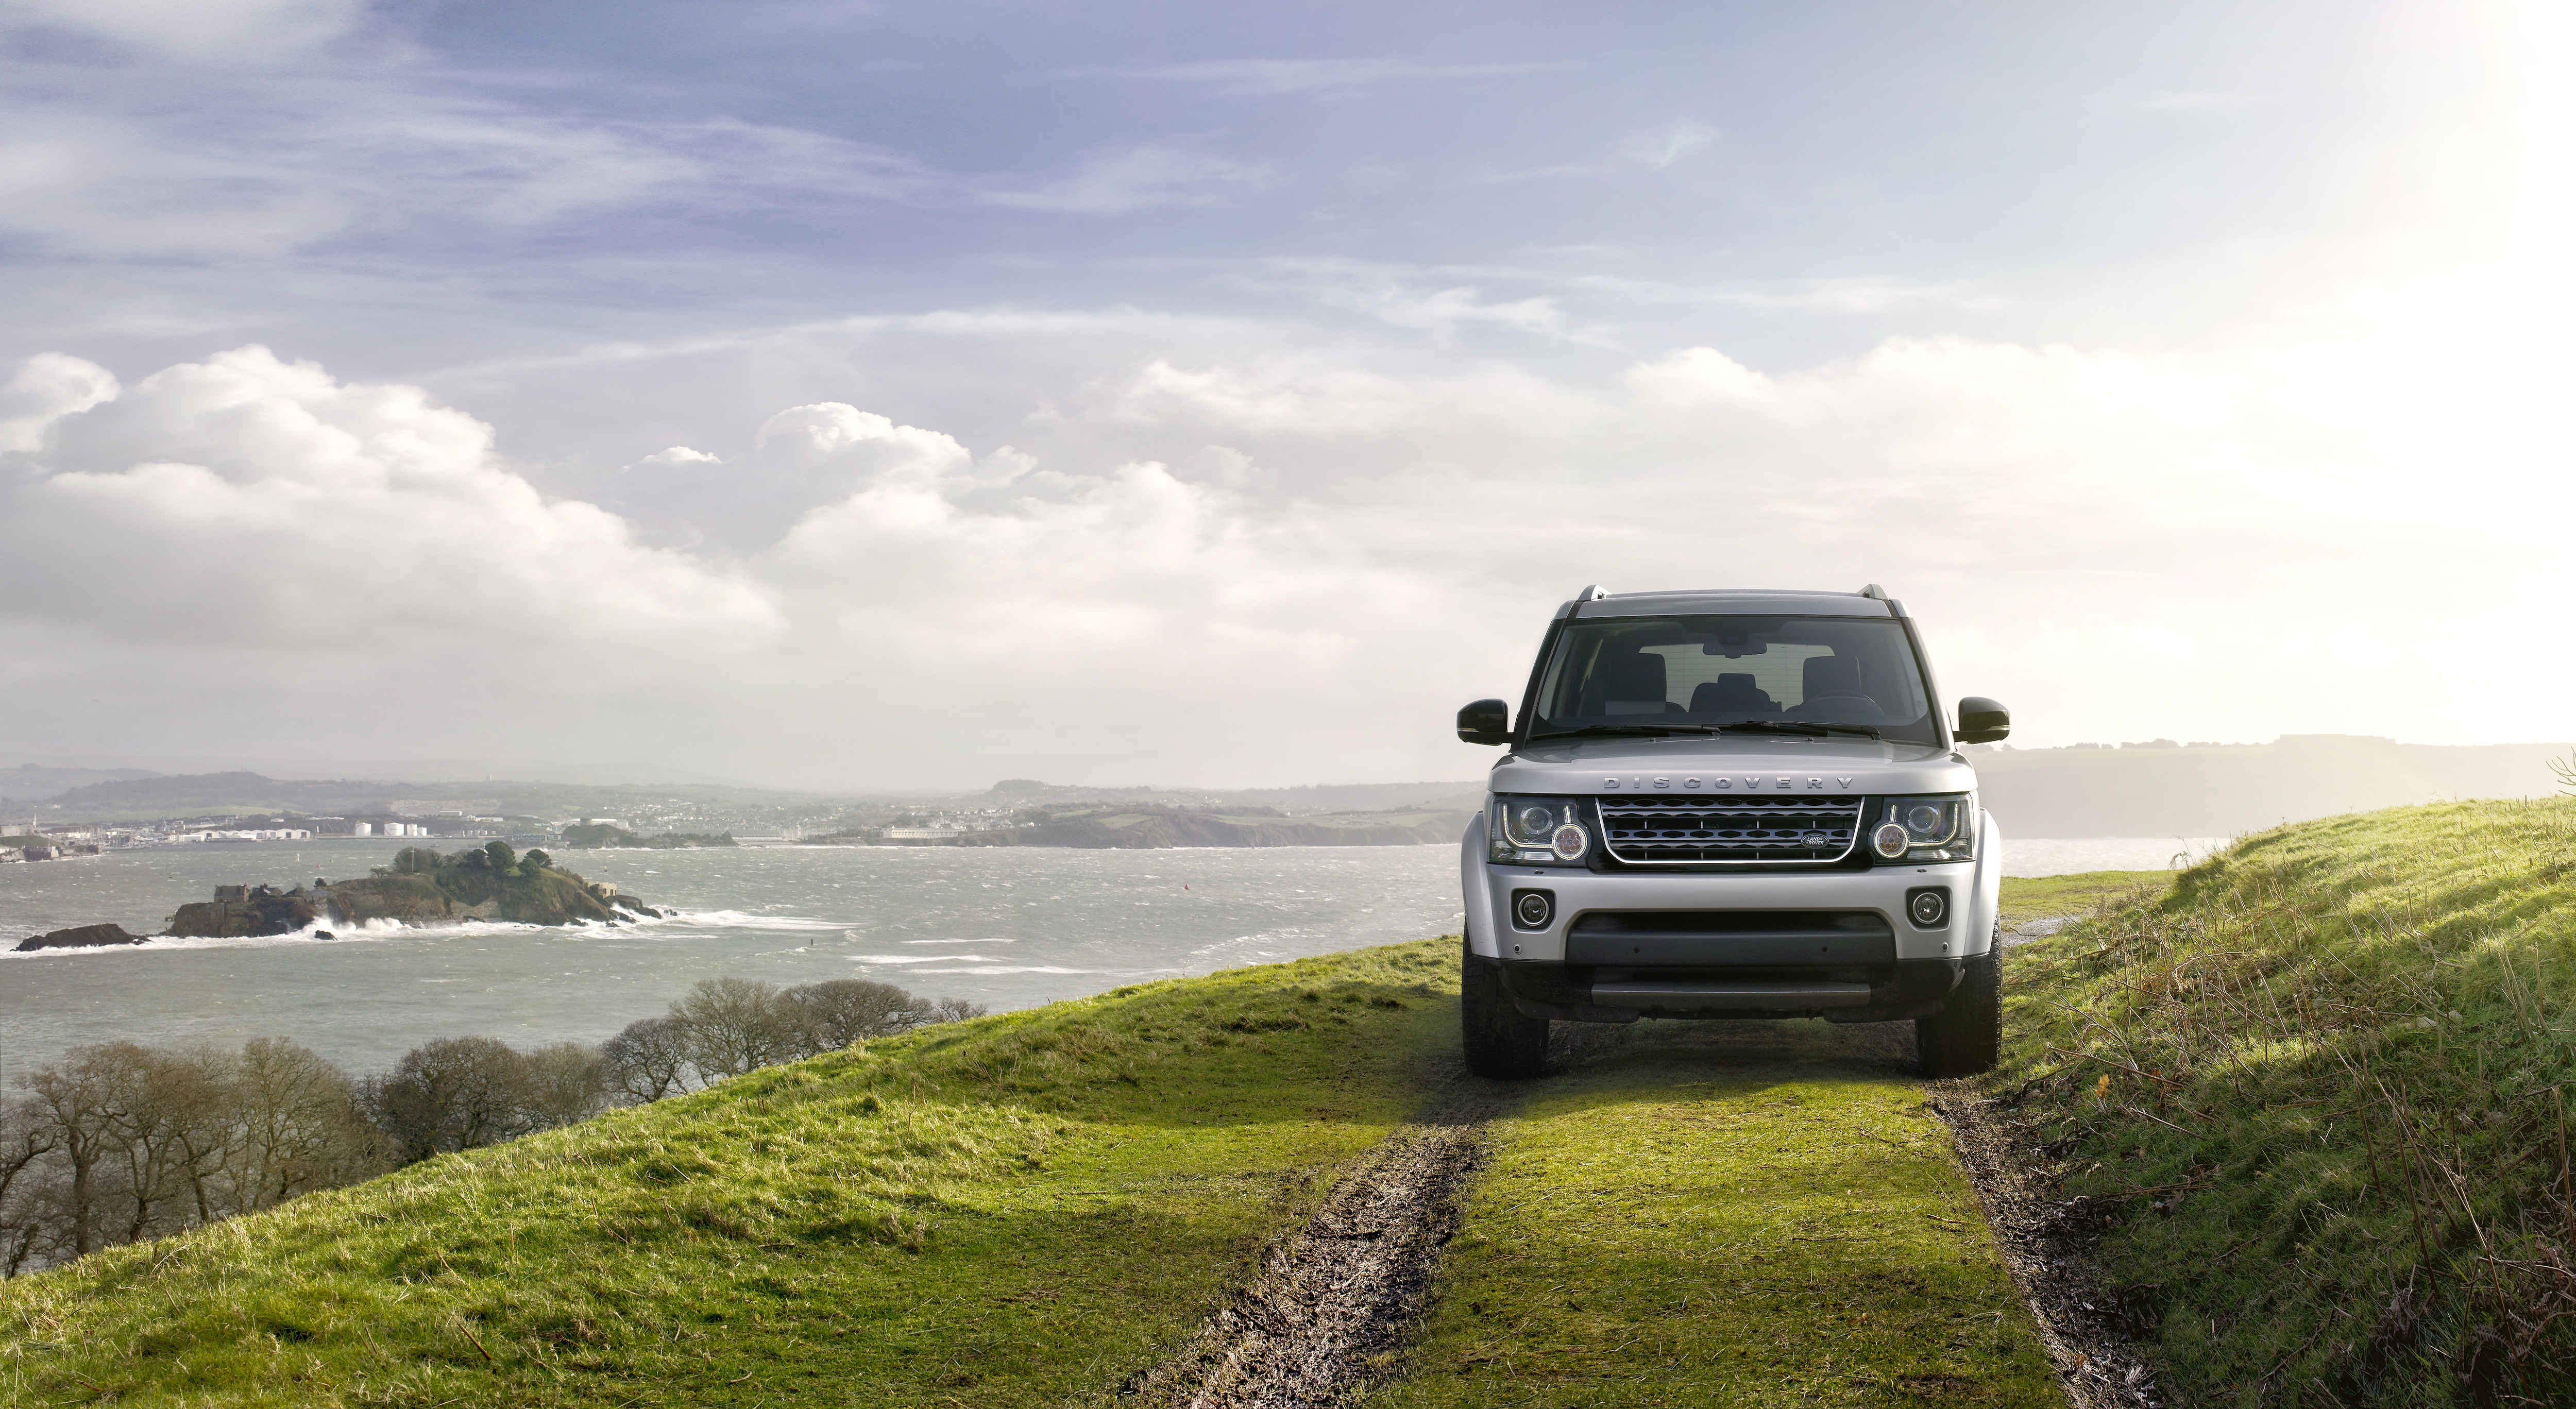 land rover discovery, land rover, vehicles